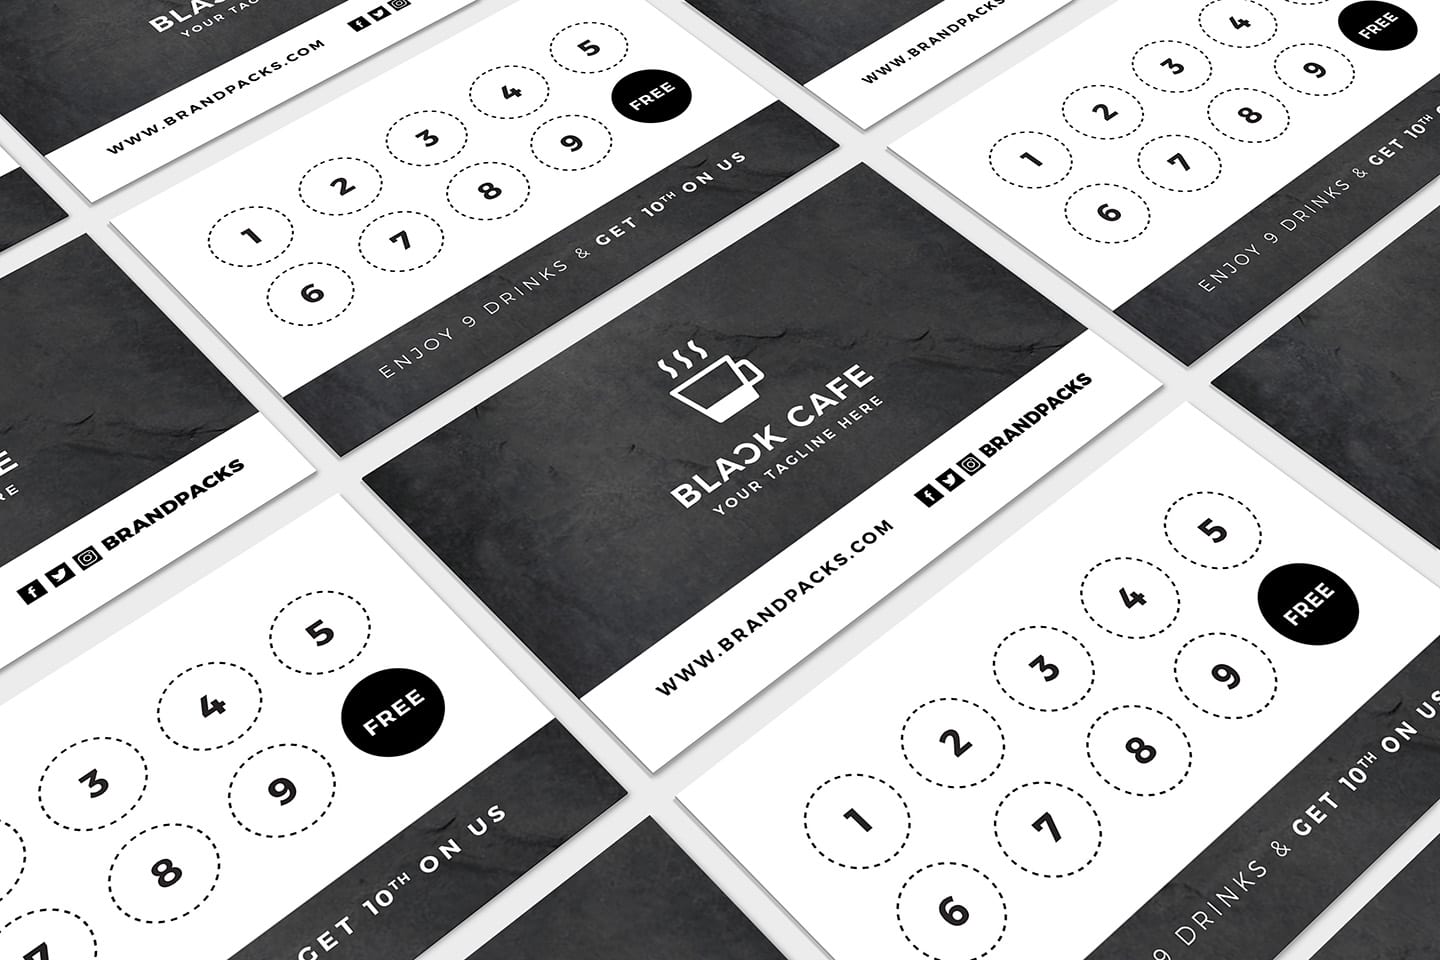 Free Loyalty Card Templates - PSD, Ai & Vector - BrandPacks Intended For Loyalty Card Design Template